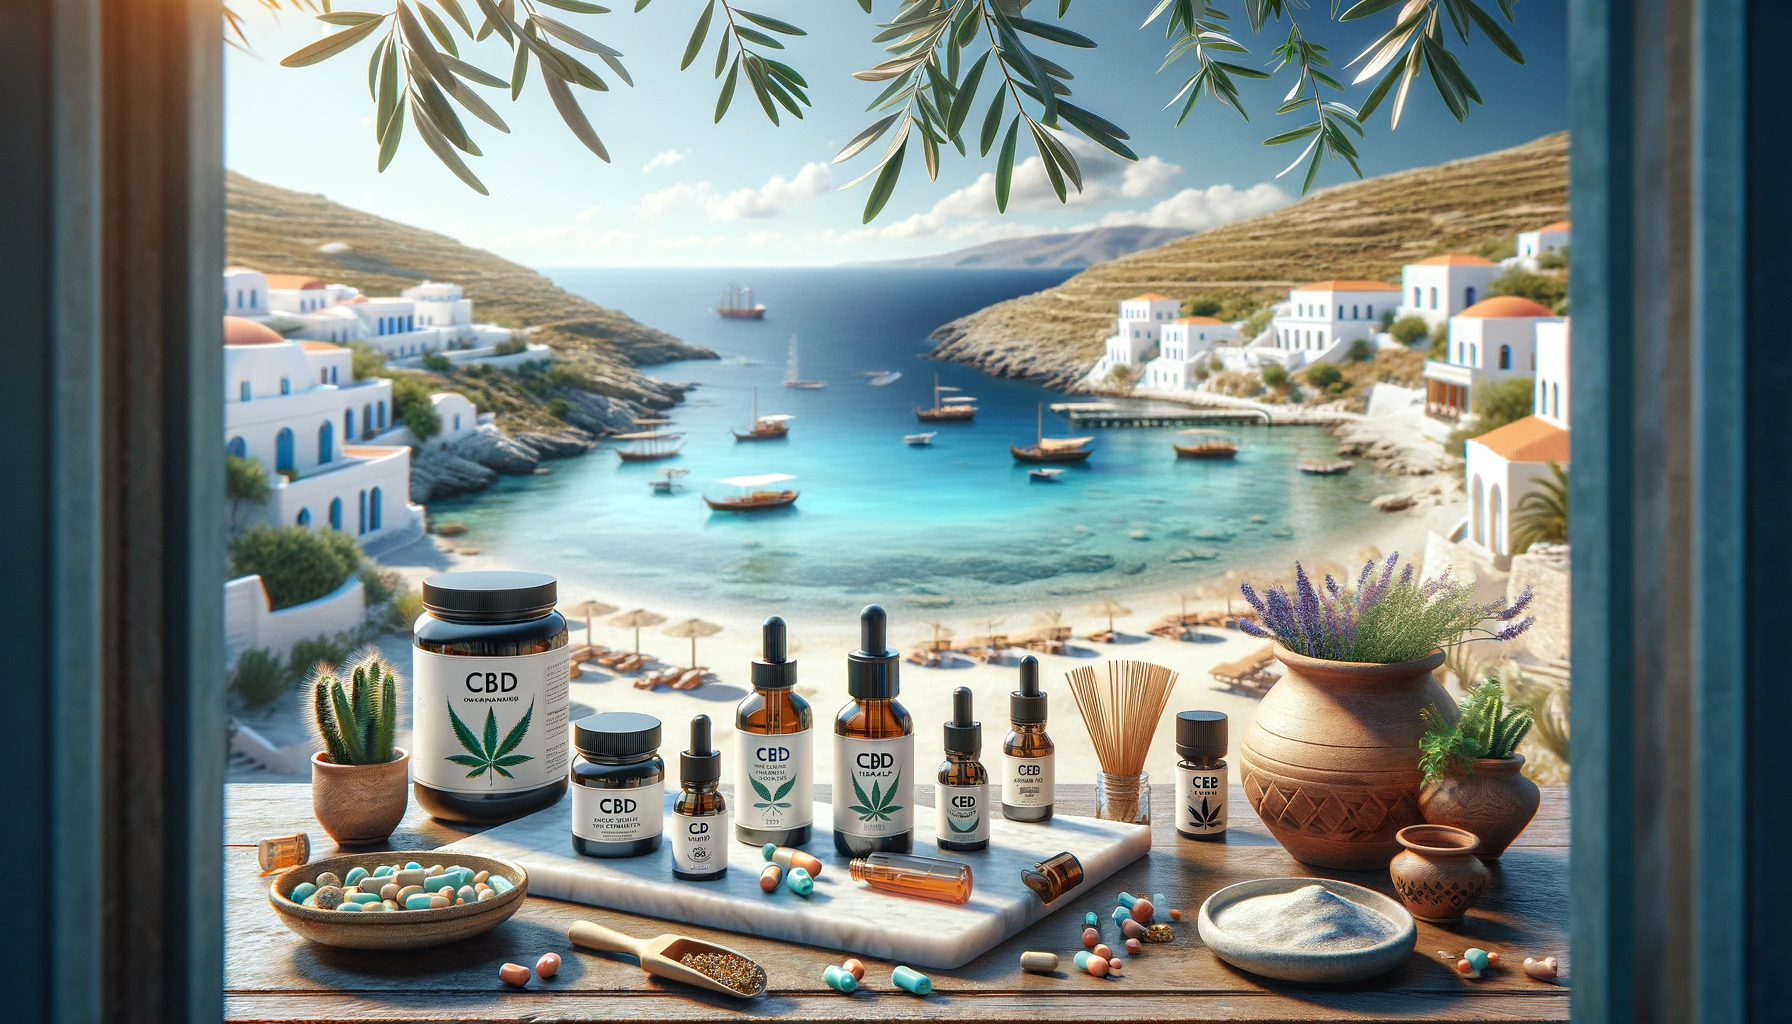 photo-quality 16_9 image for the blog topic 'CBD and Greek Island Wellness_ A Mediterranean Escape'.